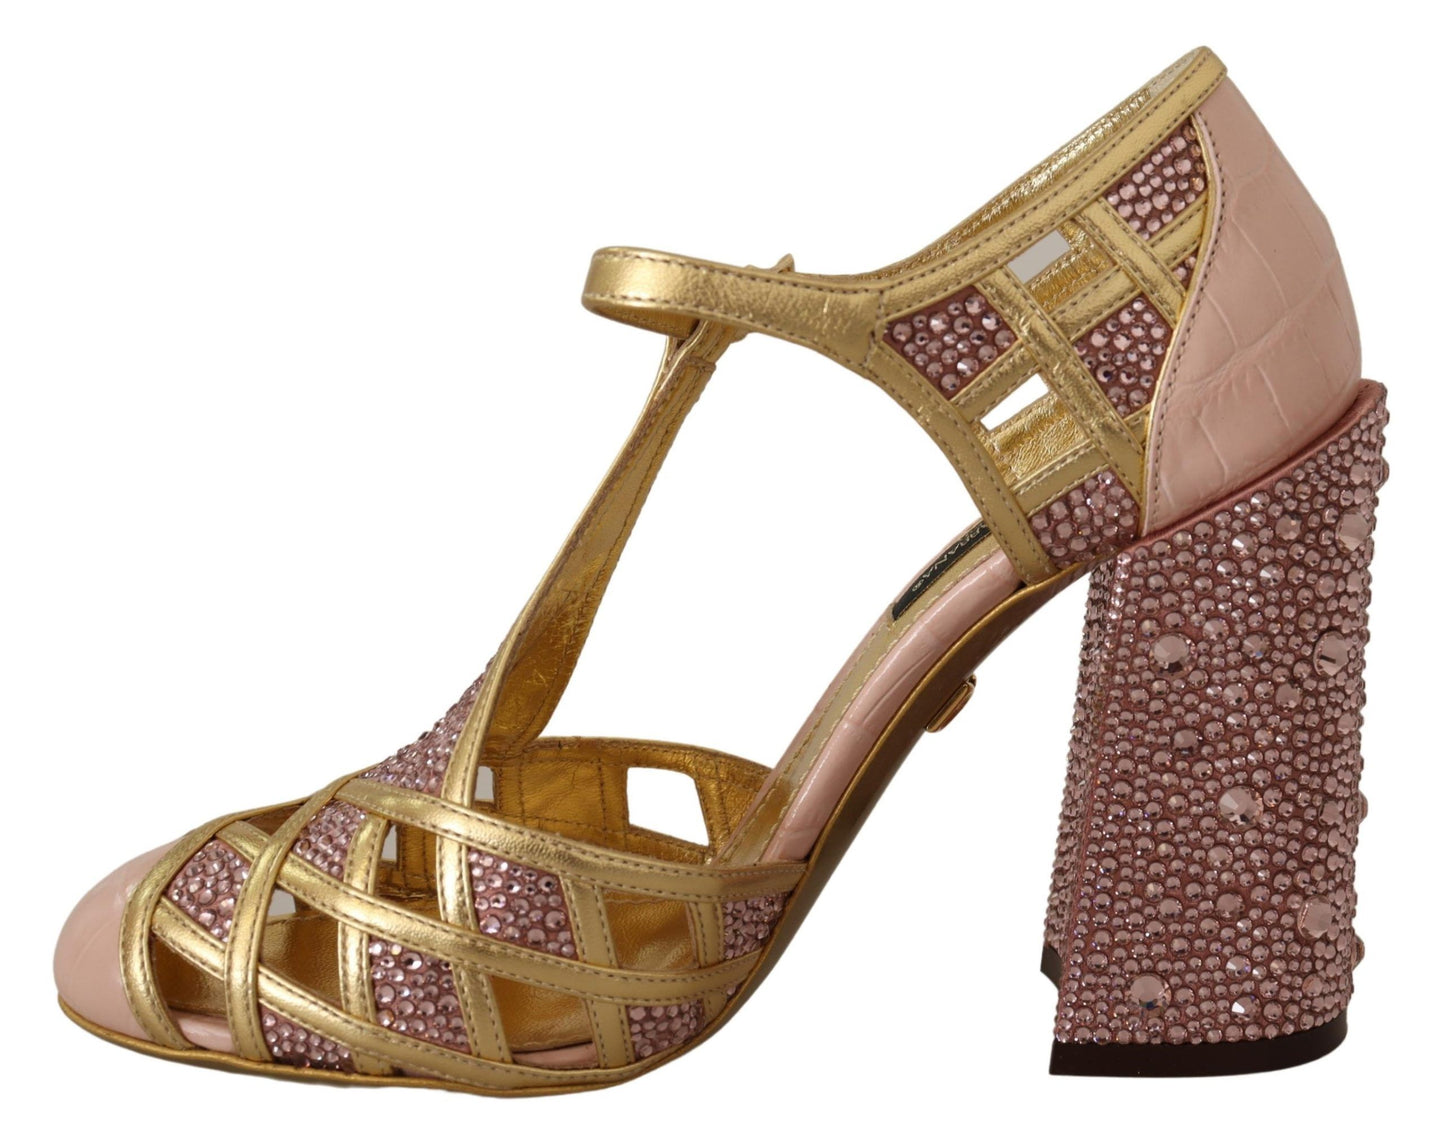 Dolce & Gabbana Silk-Infused Leather Crystal Pumps in Pink Gold